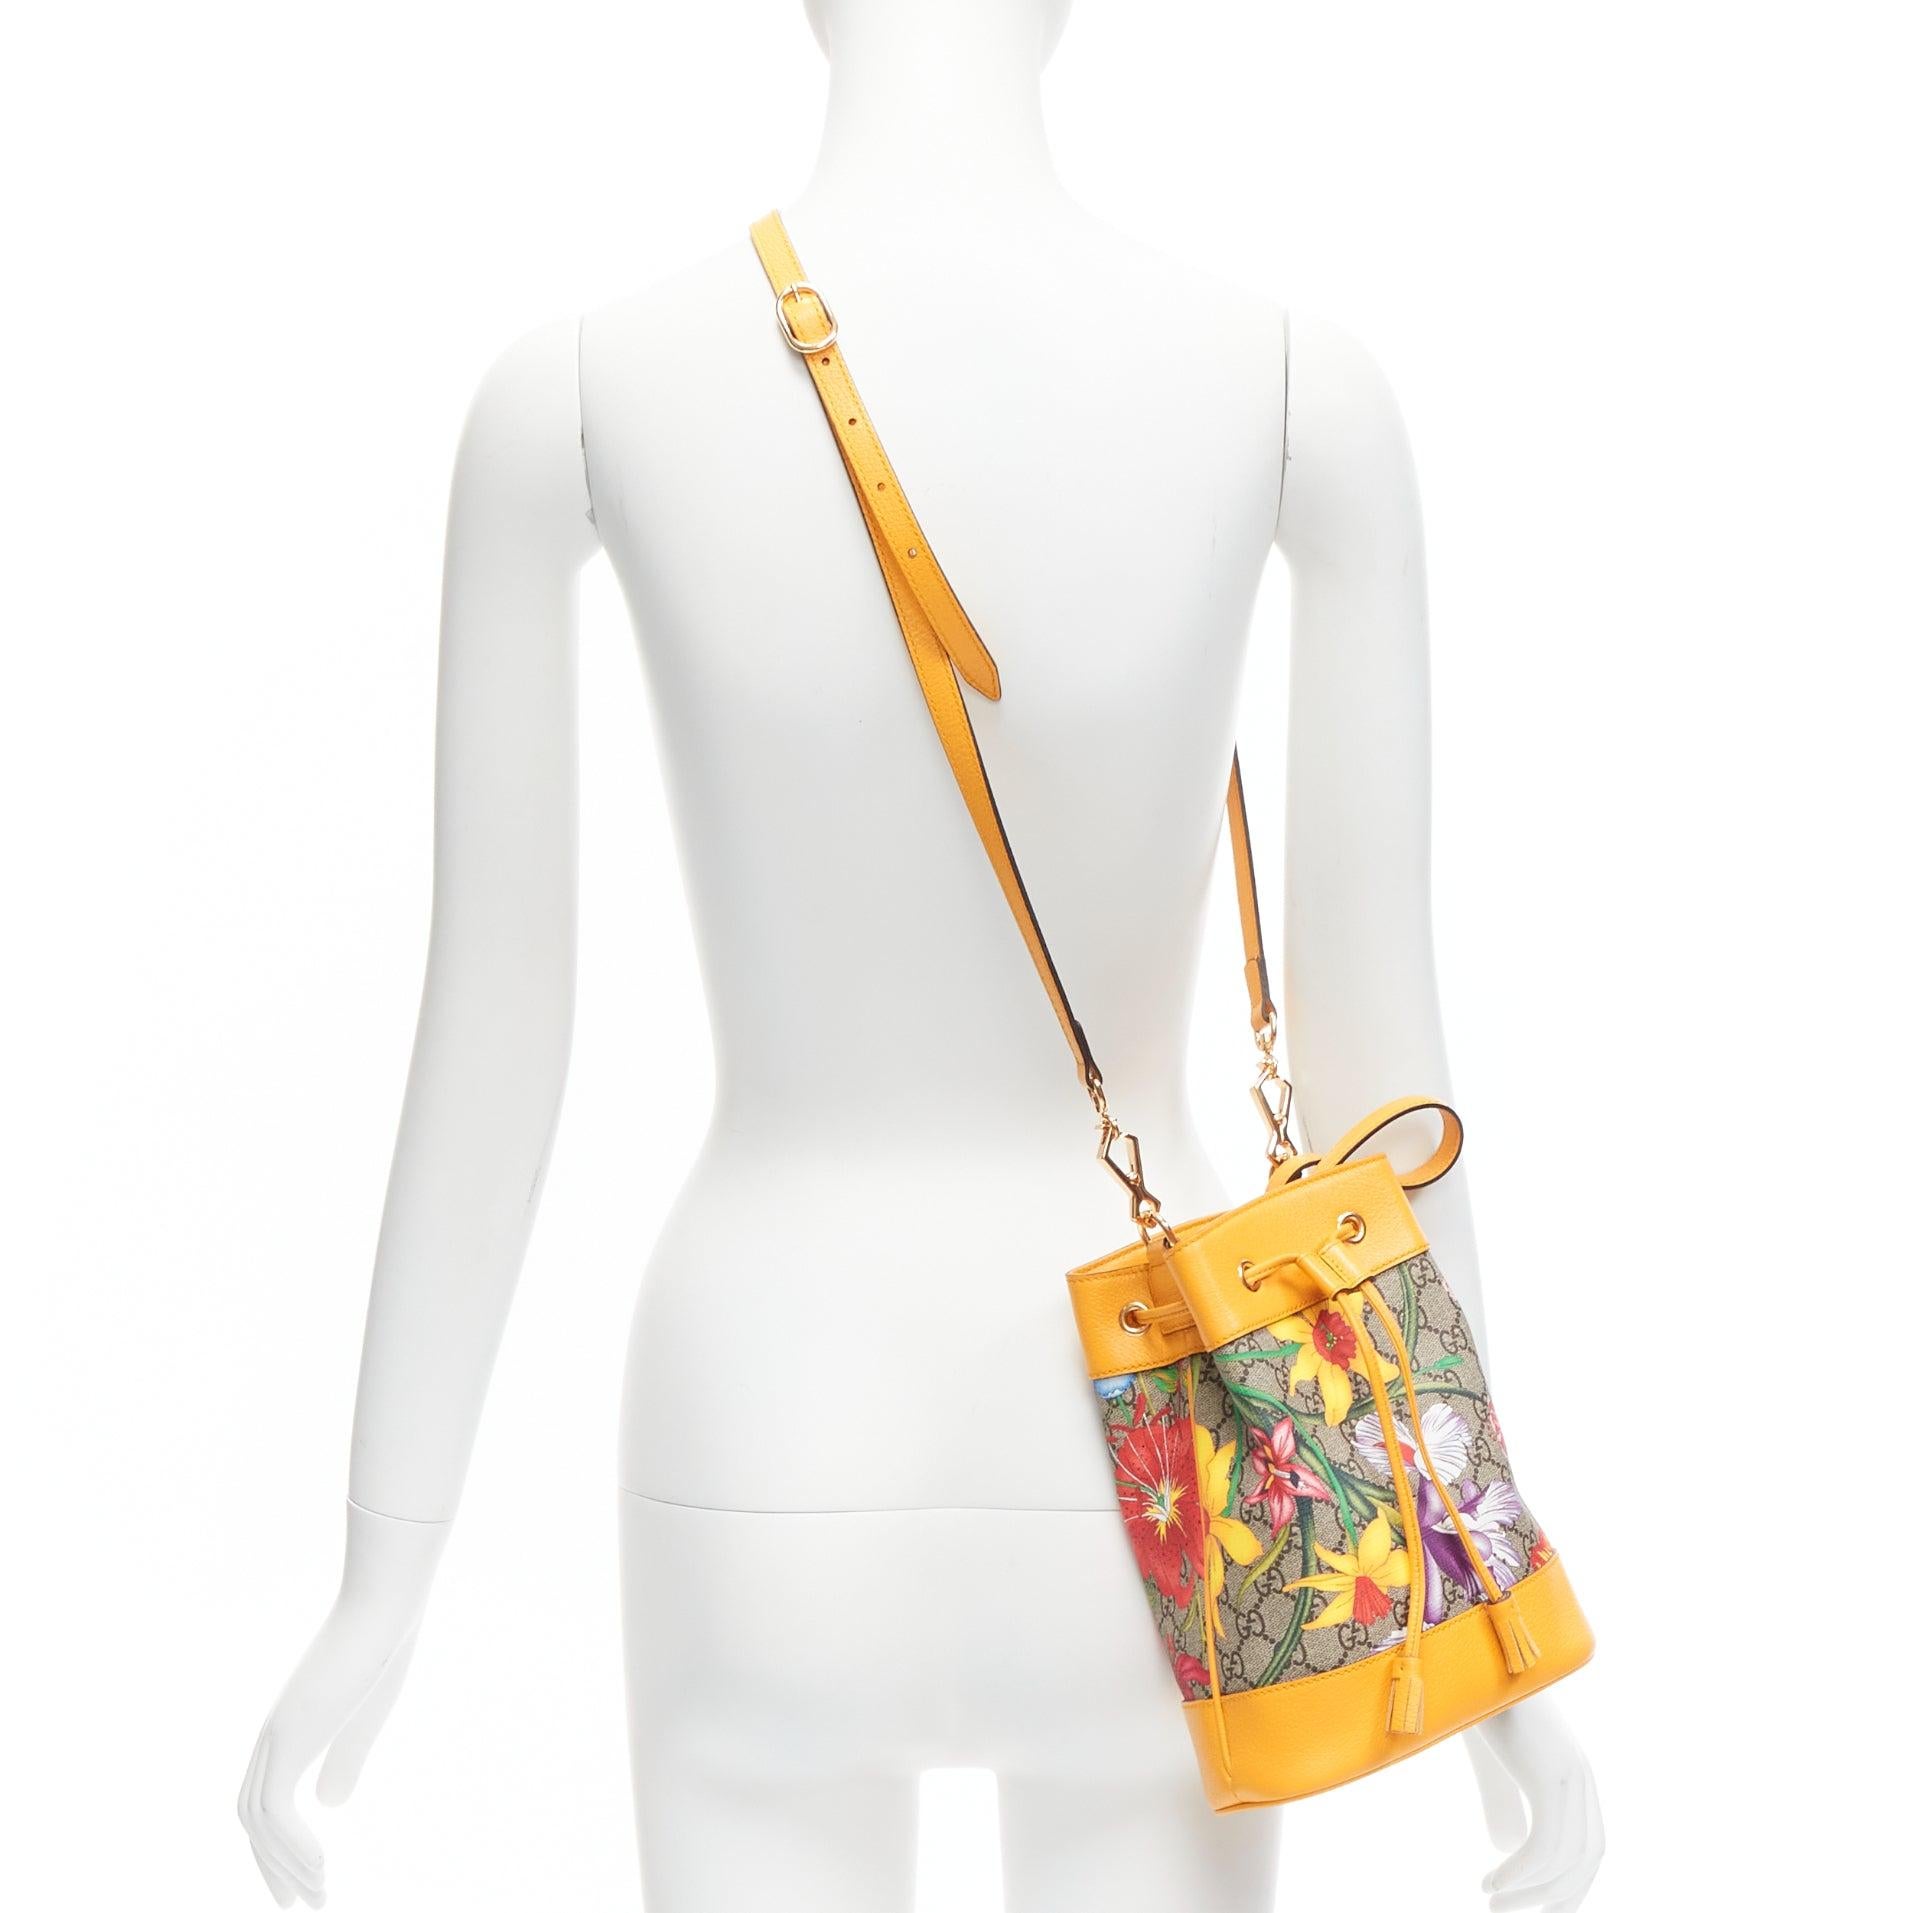 GUCCI Ophidia Bucket GG logo supreme floral leather small shoulder bag
Reference: CELE/A00013
Brand: Gucci
Designer: Alessandro Michele
Model: Bucket
Collection: Ophidia
Material: Canvas, Leather
Color: Yellow, Multicolour
Pattern: Floral
Closure: